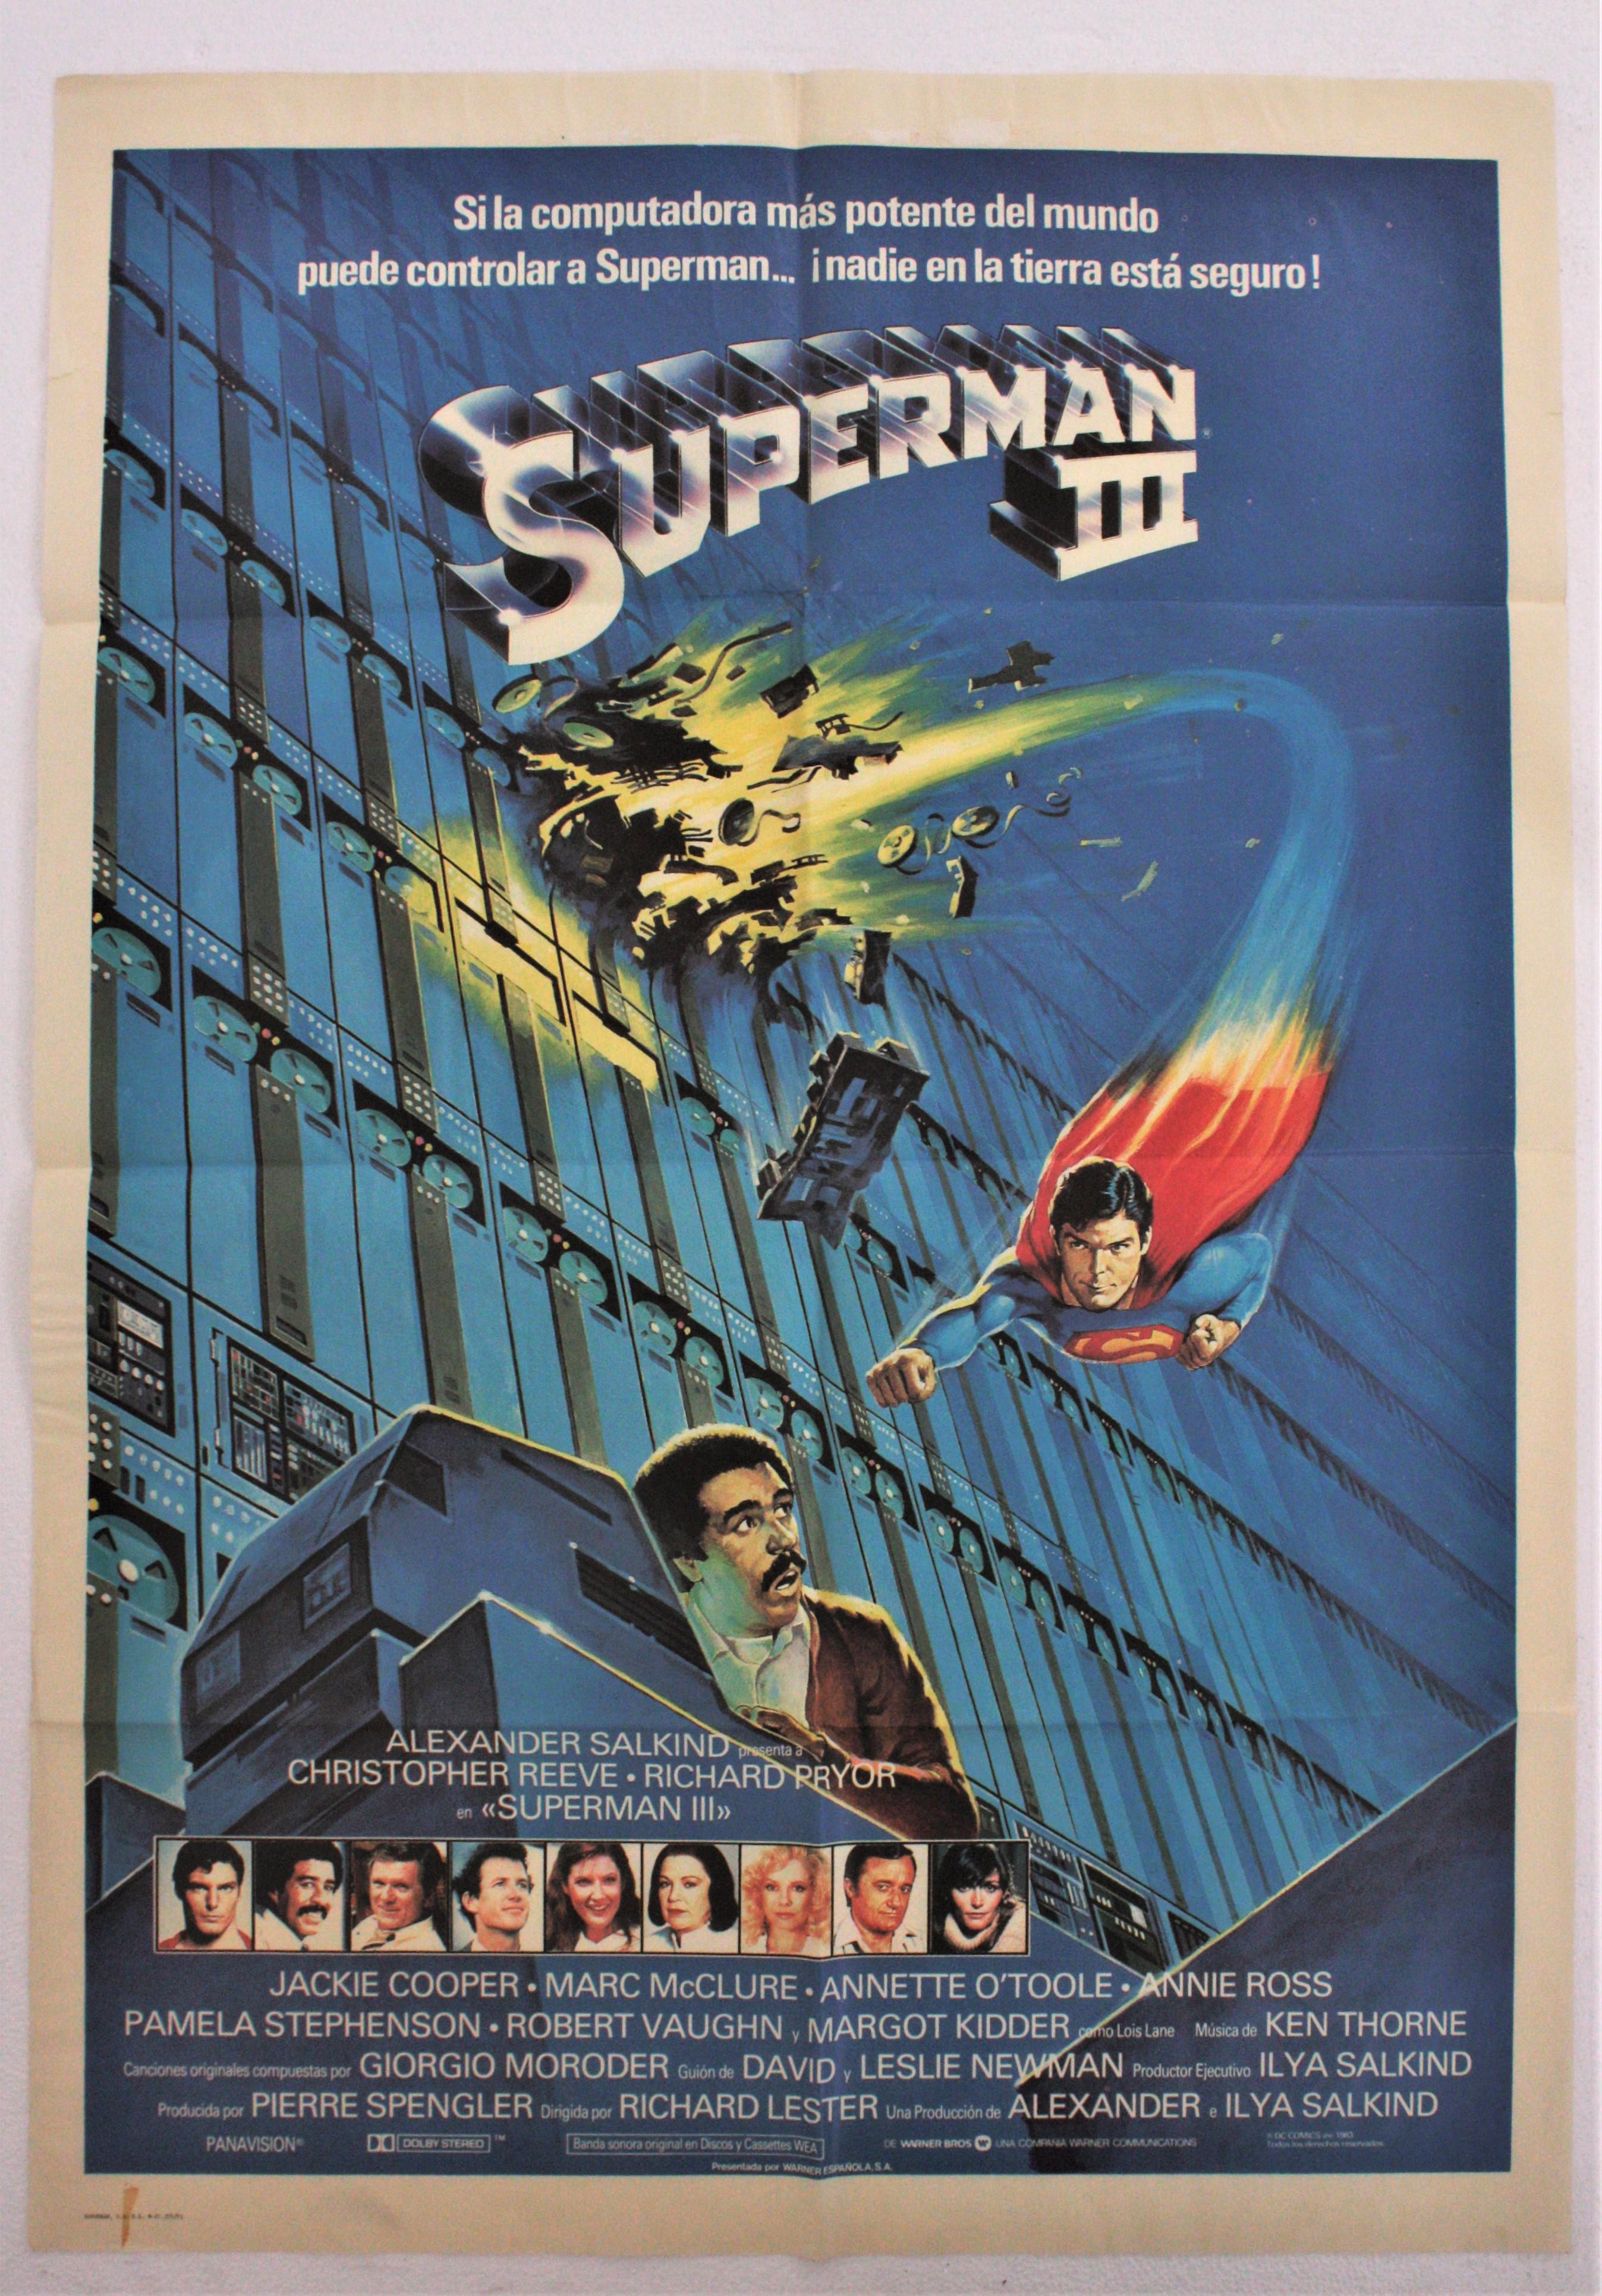 Original unframed superman III Spanish Movie Poster, 1983
Printed by Novograf
Good condition with some tears and fold marks.
Measures: 100 cm H x 70 cm W // 39,37 in H x 27,55 in W.